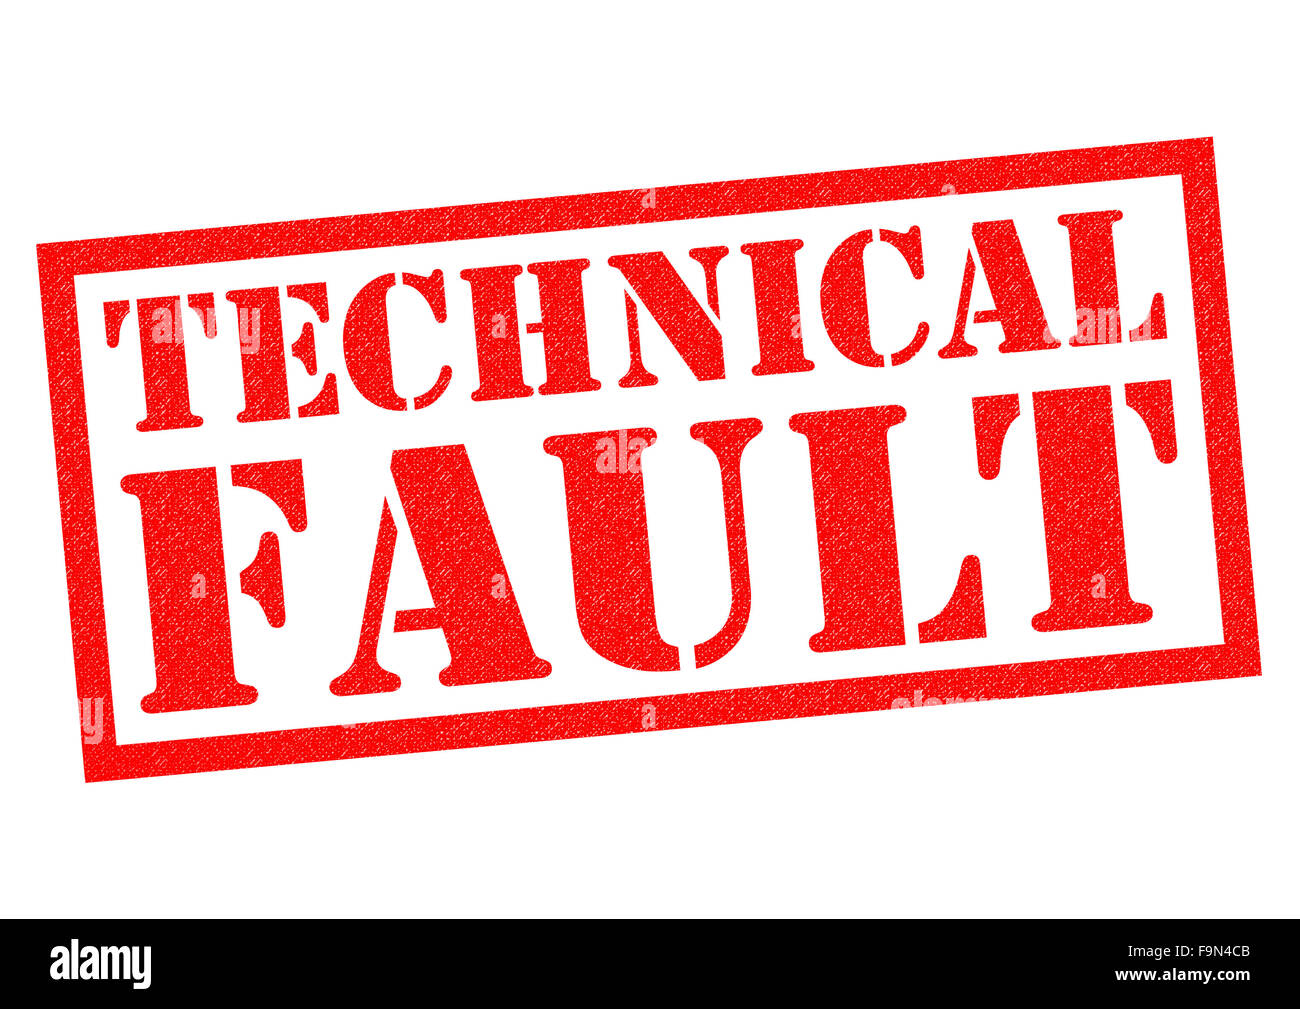 TECHNICAL FAULT red Rubber Stamp over a white background. Stock Photo